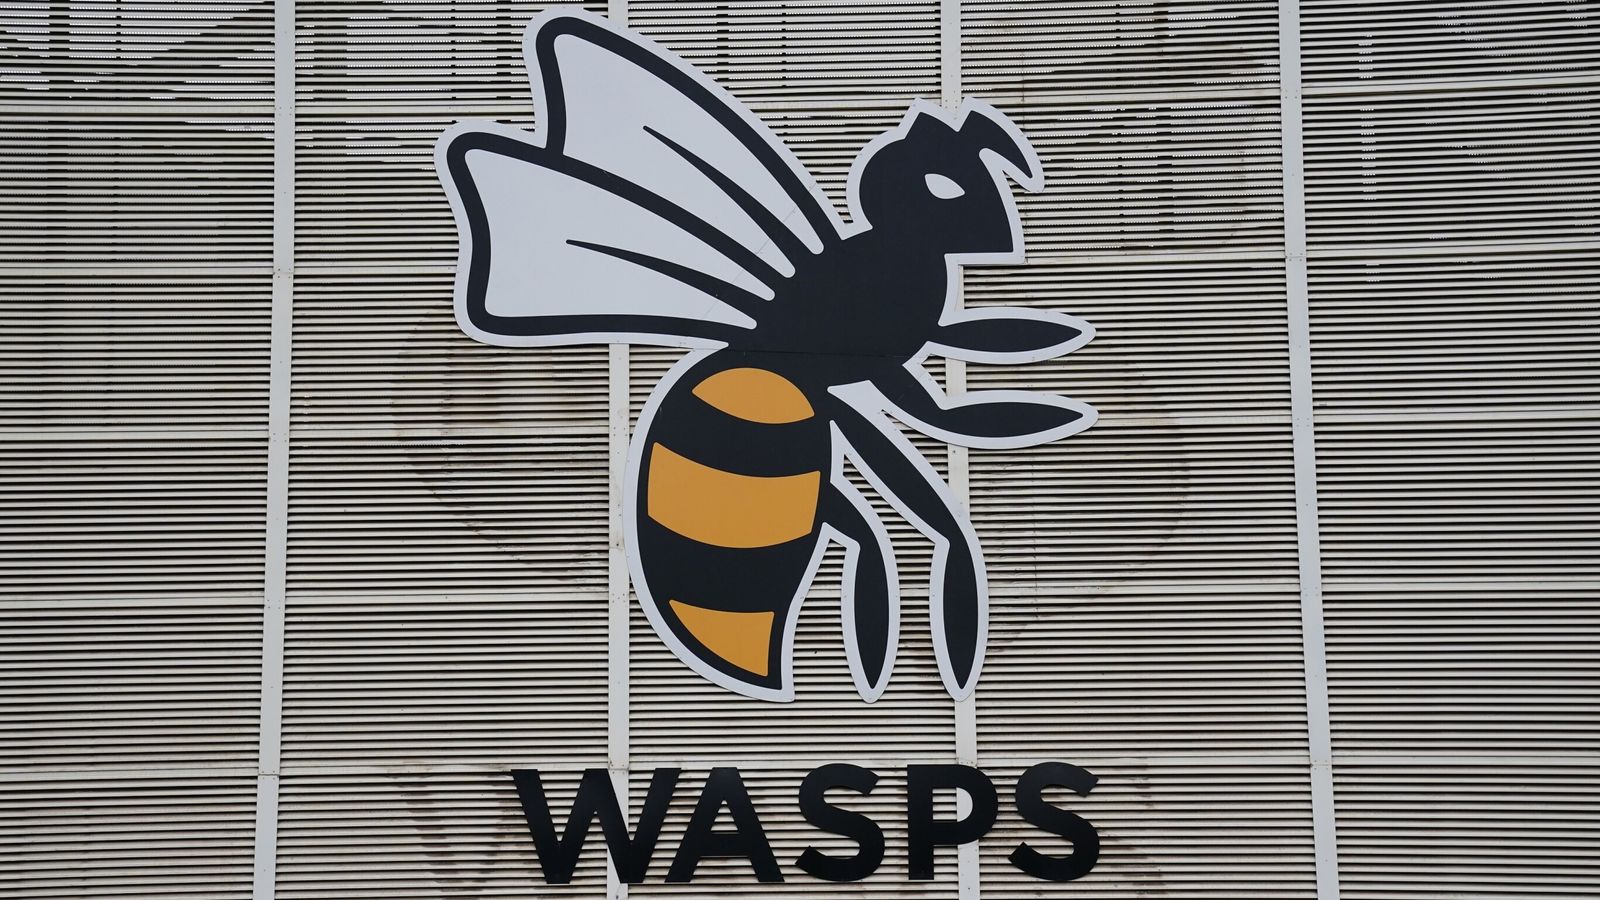 Wasps: Gallagher Premiership club placed into administration | Rugby Union News